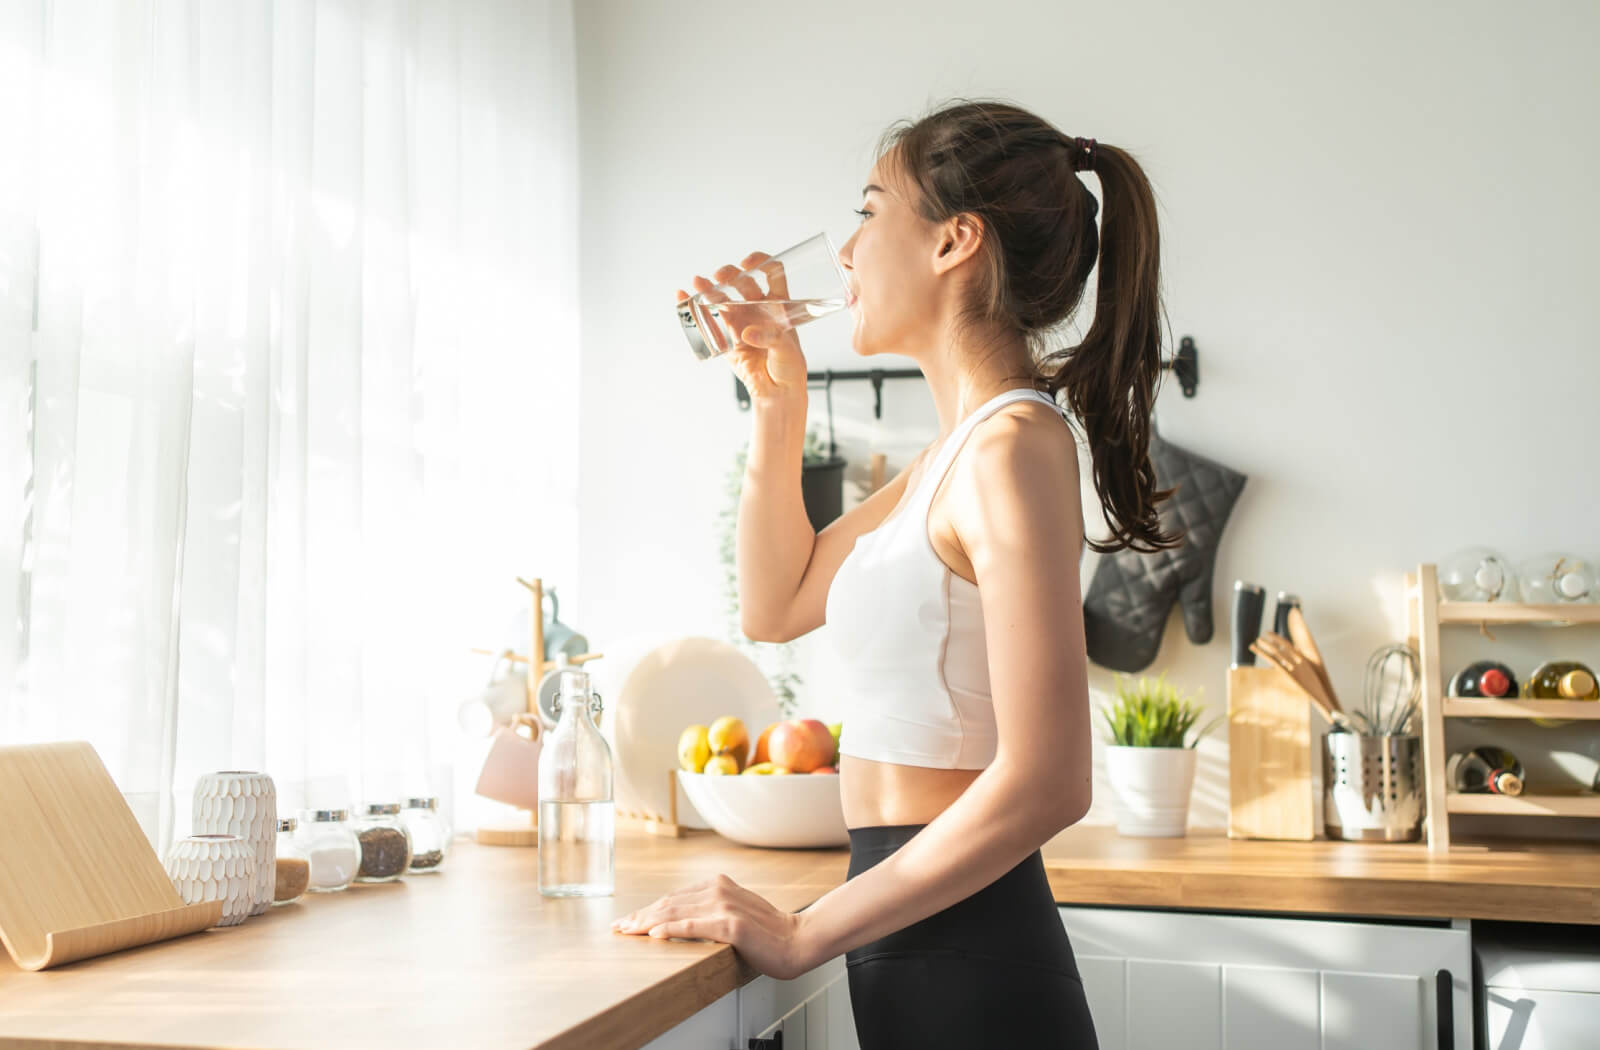 A woman in her sportswear drinking a glass of water in a brightly lit kitchen.